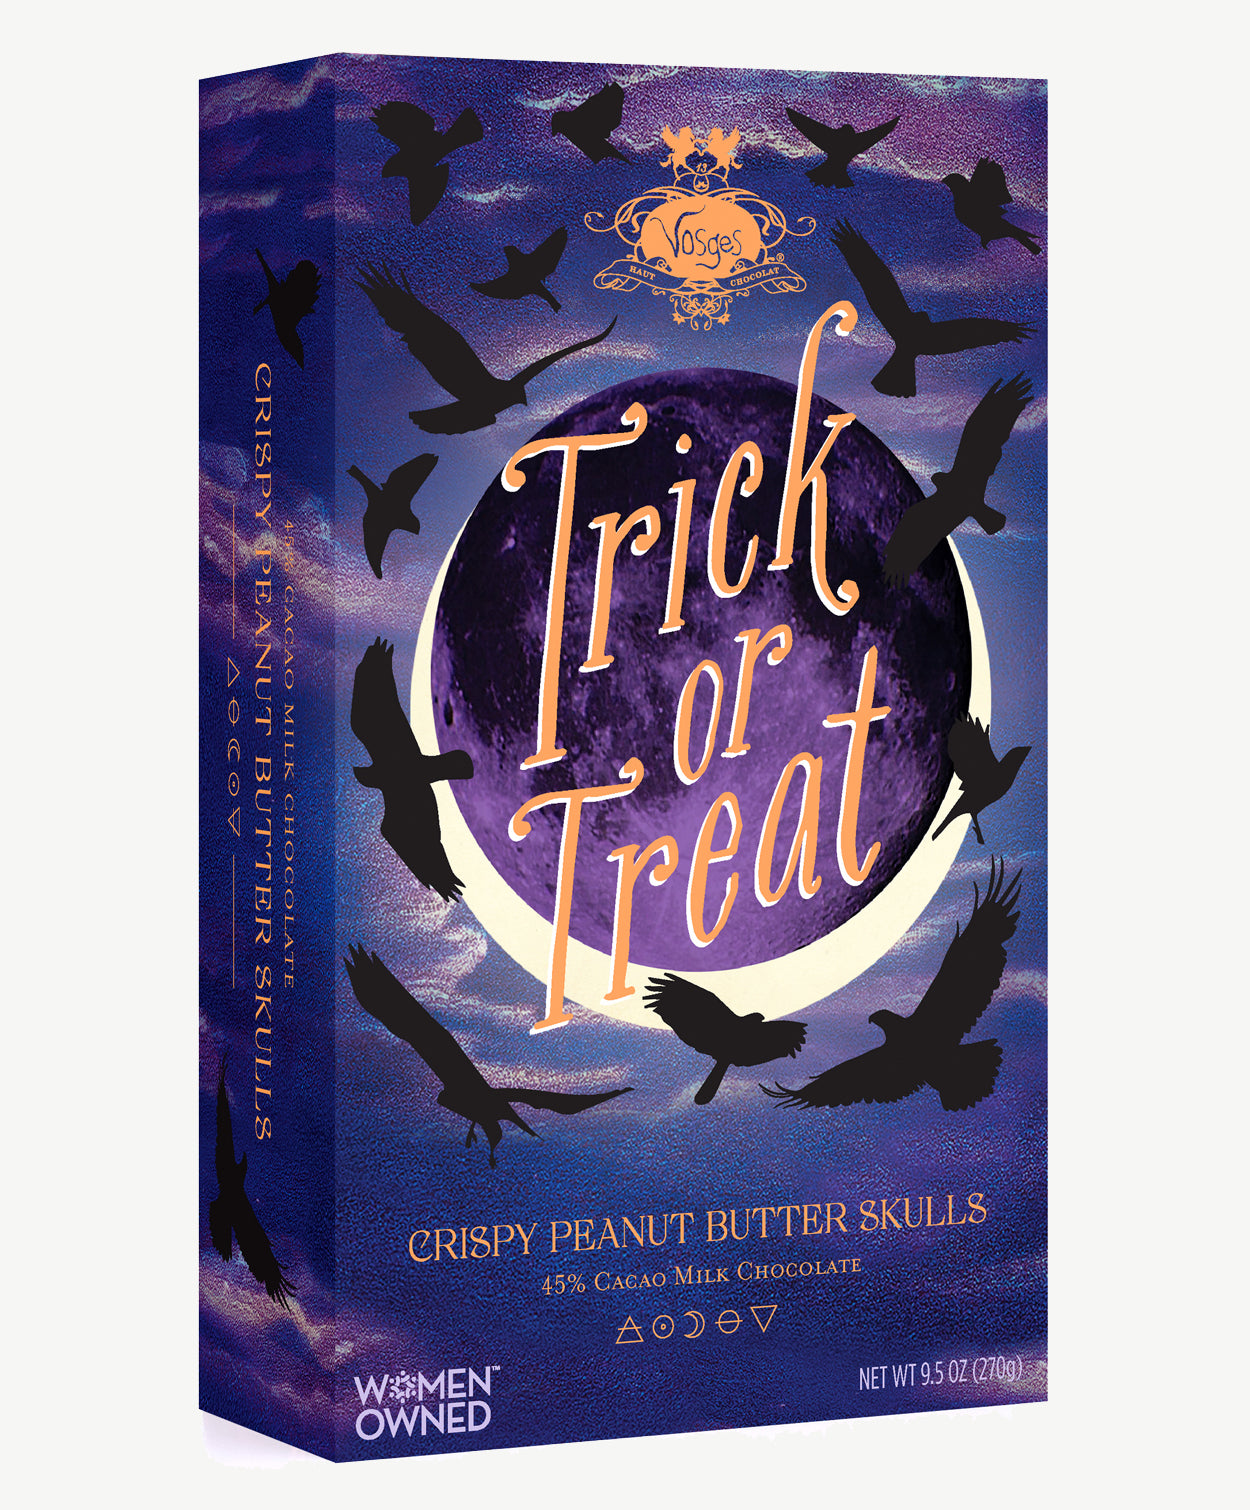 A purple and blue box decorated in orange text reading, "Trick or Treat" stands against a light grey background.